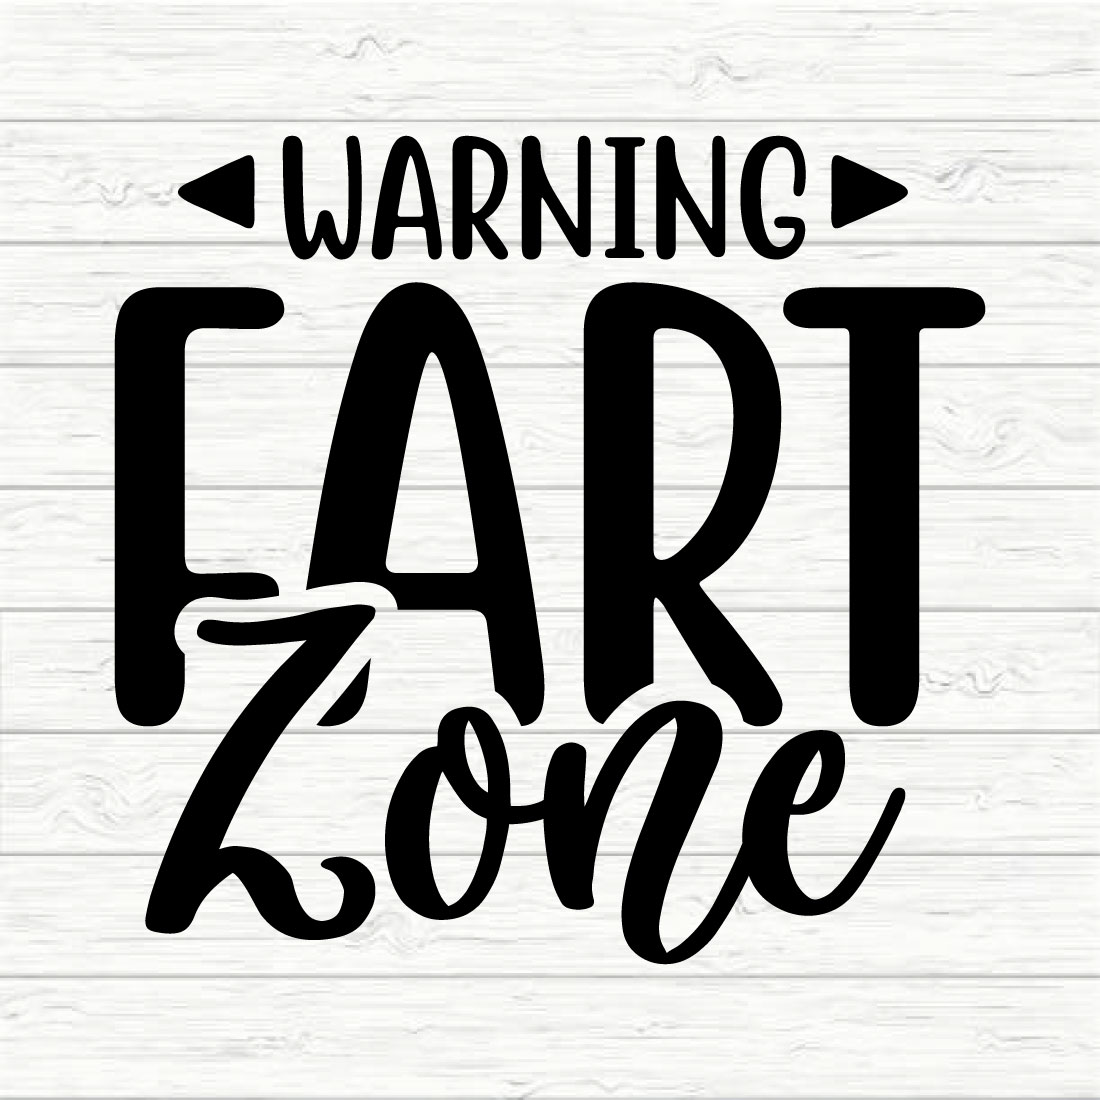 Warning fart zone preview image.